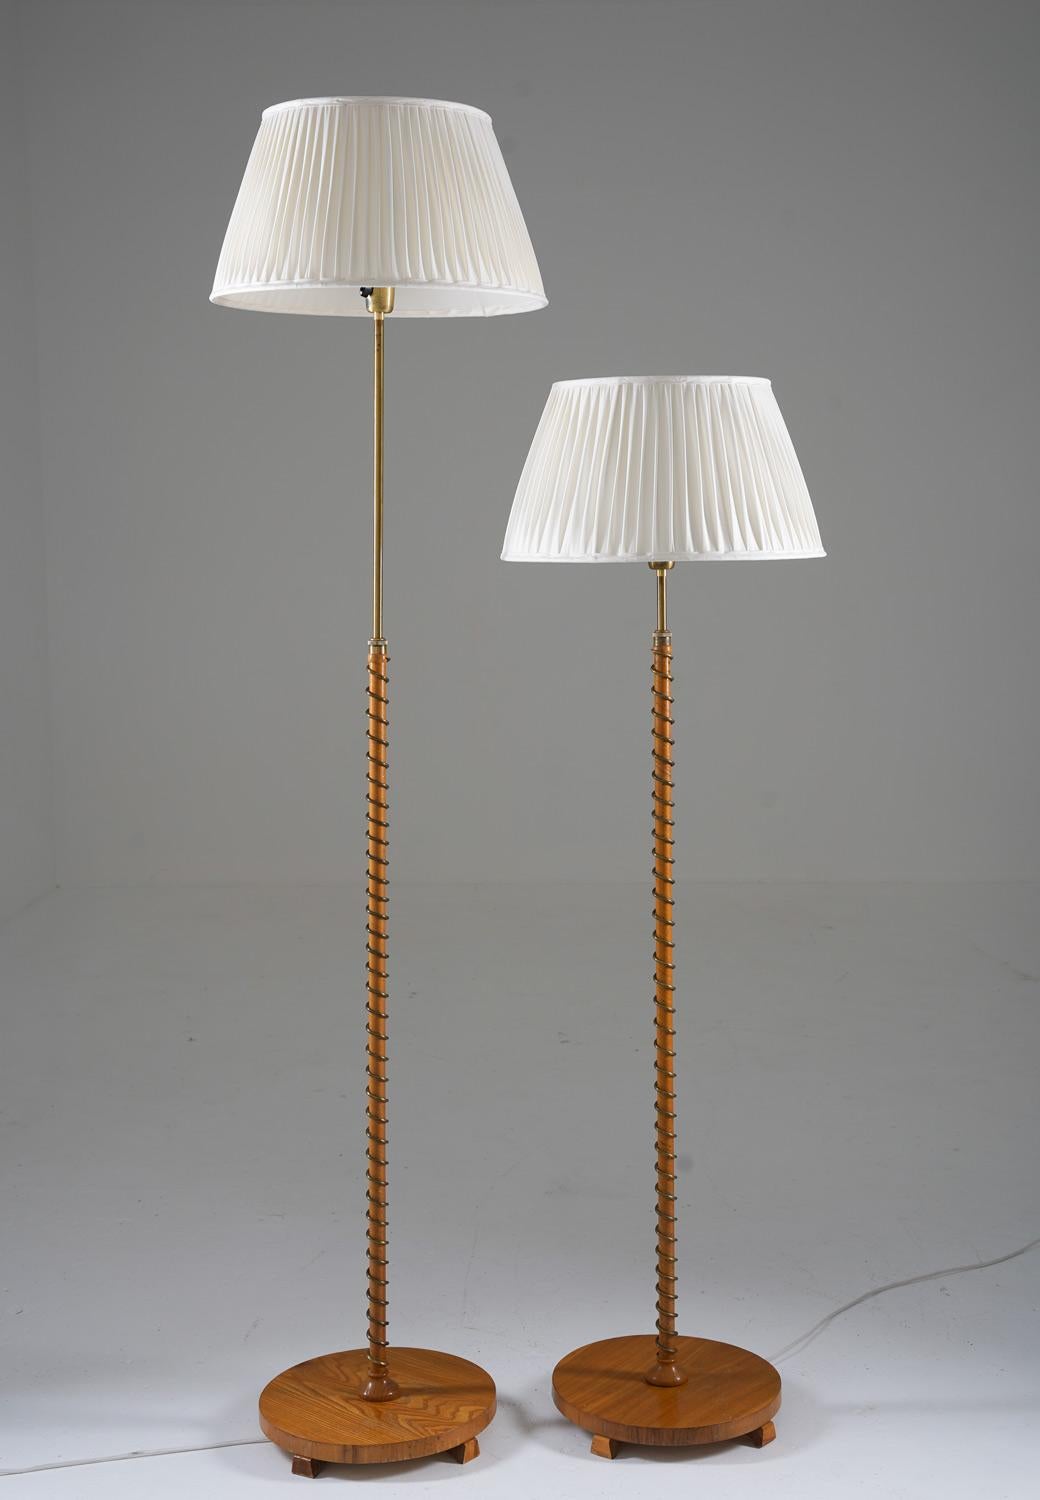 Beautiful floor lamps, manufactured in Sweden ca 1940.

These rare floor lamps consist of a brass pole, webbed in elmwood with a brass spiral around it. The pole is supported by a large wooden foot.
The height is adjustable from 140cm (55